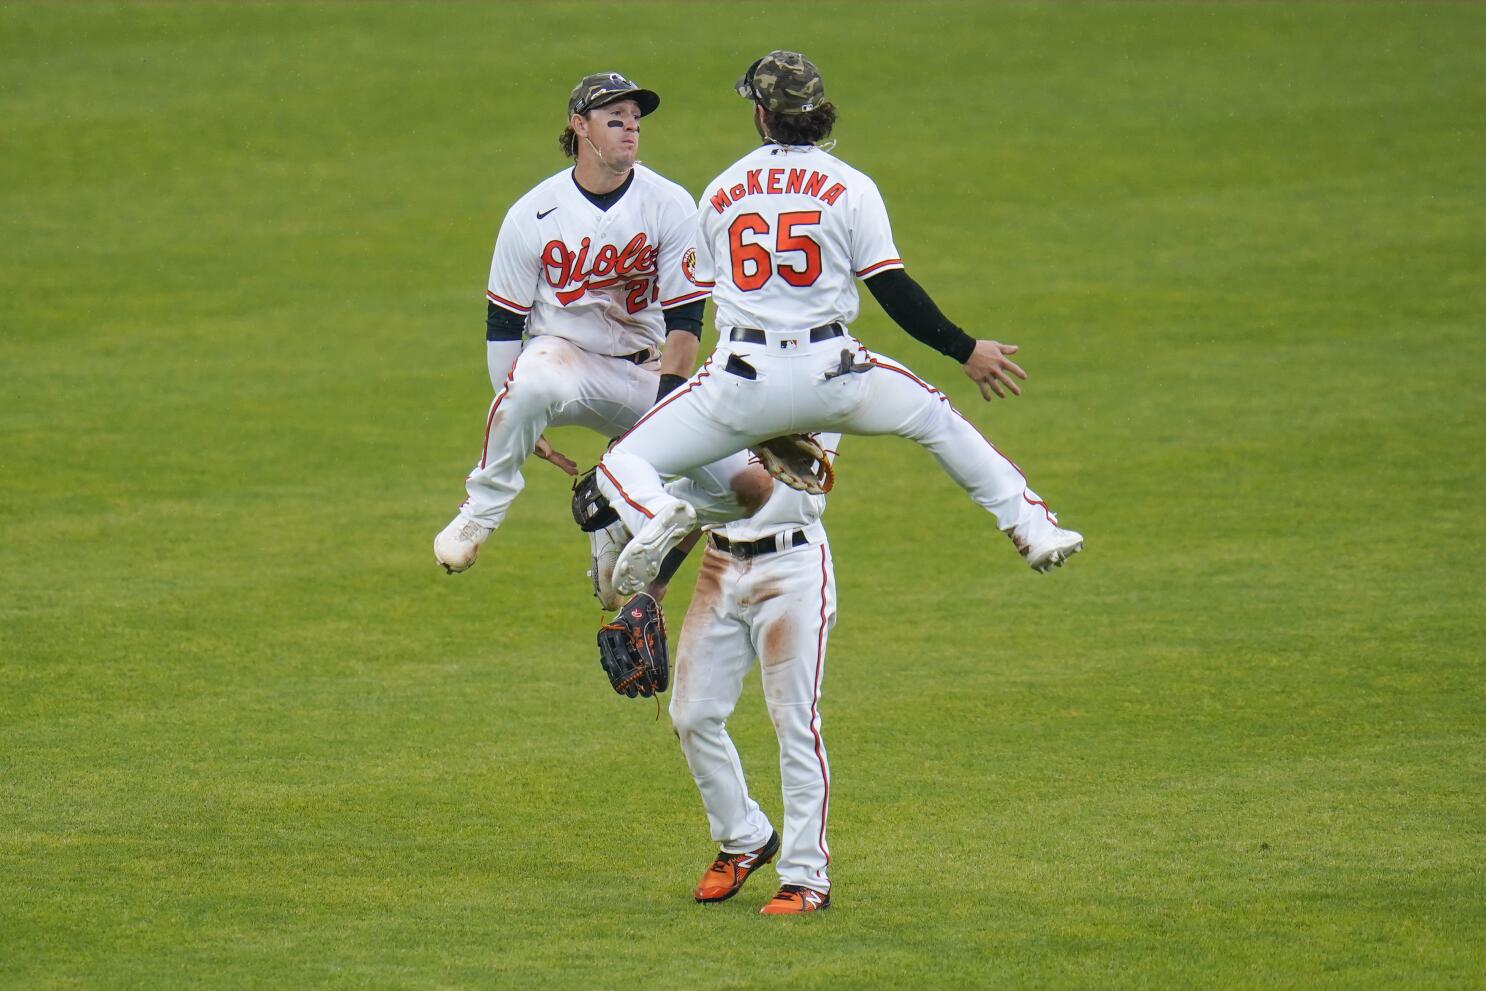 Orioles rally from deficit, beat Yankees 10-6 to avoid sweep - The